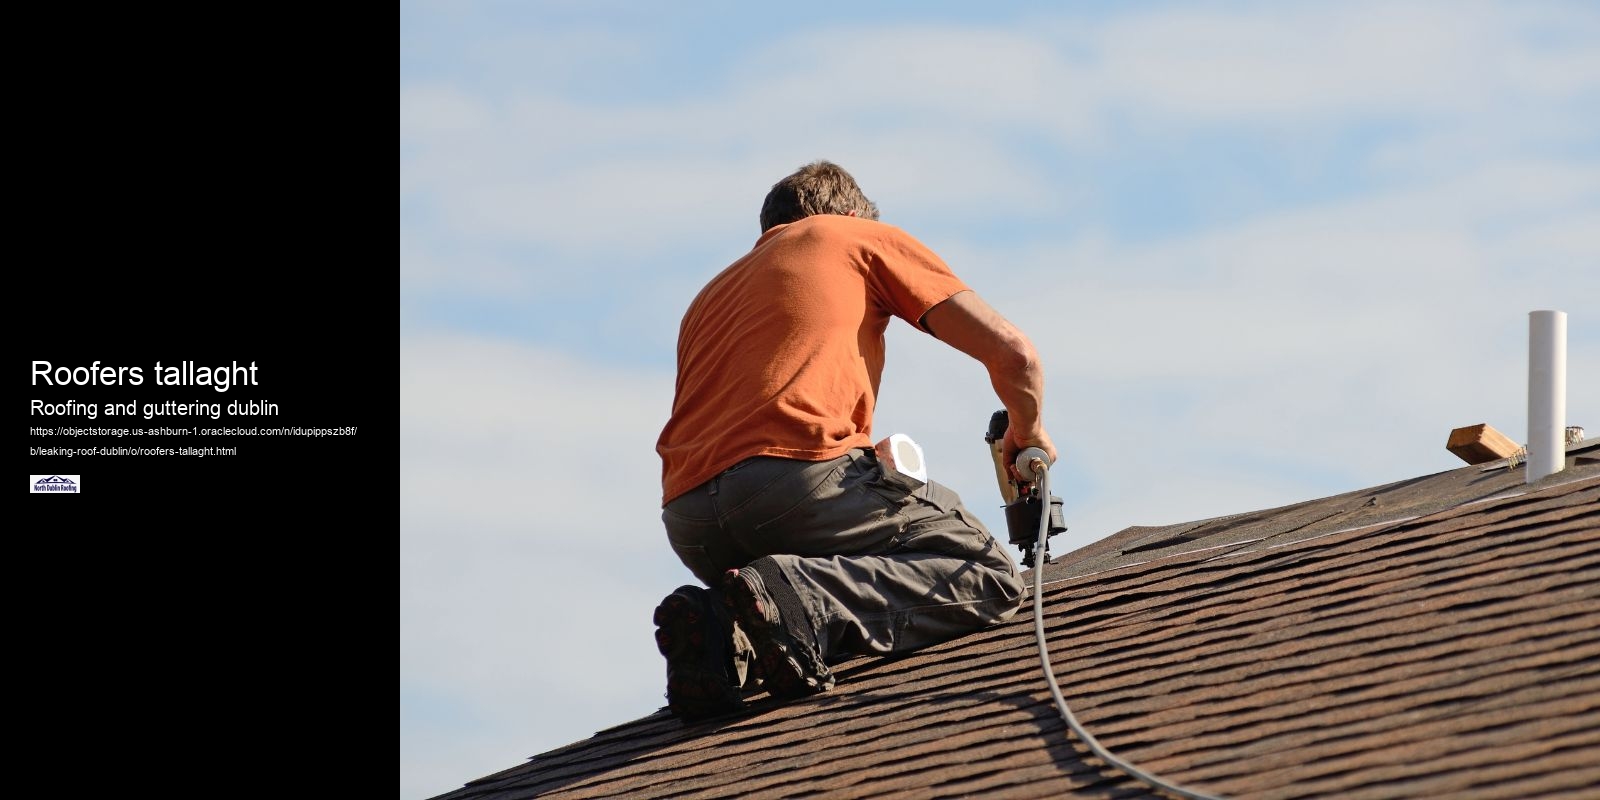 Roofers tallaght